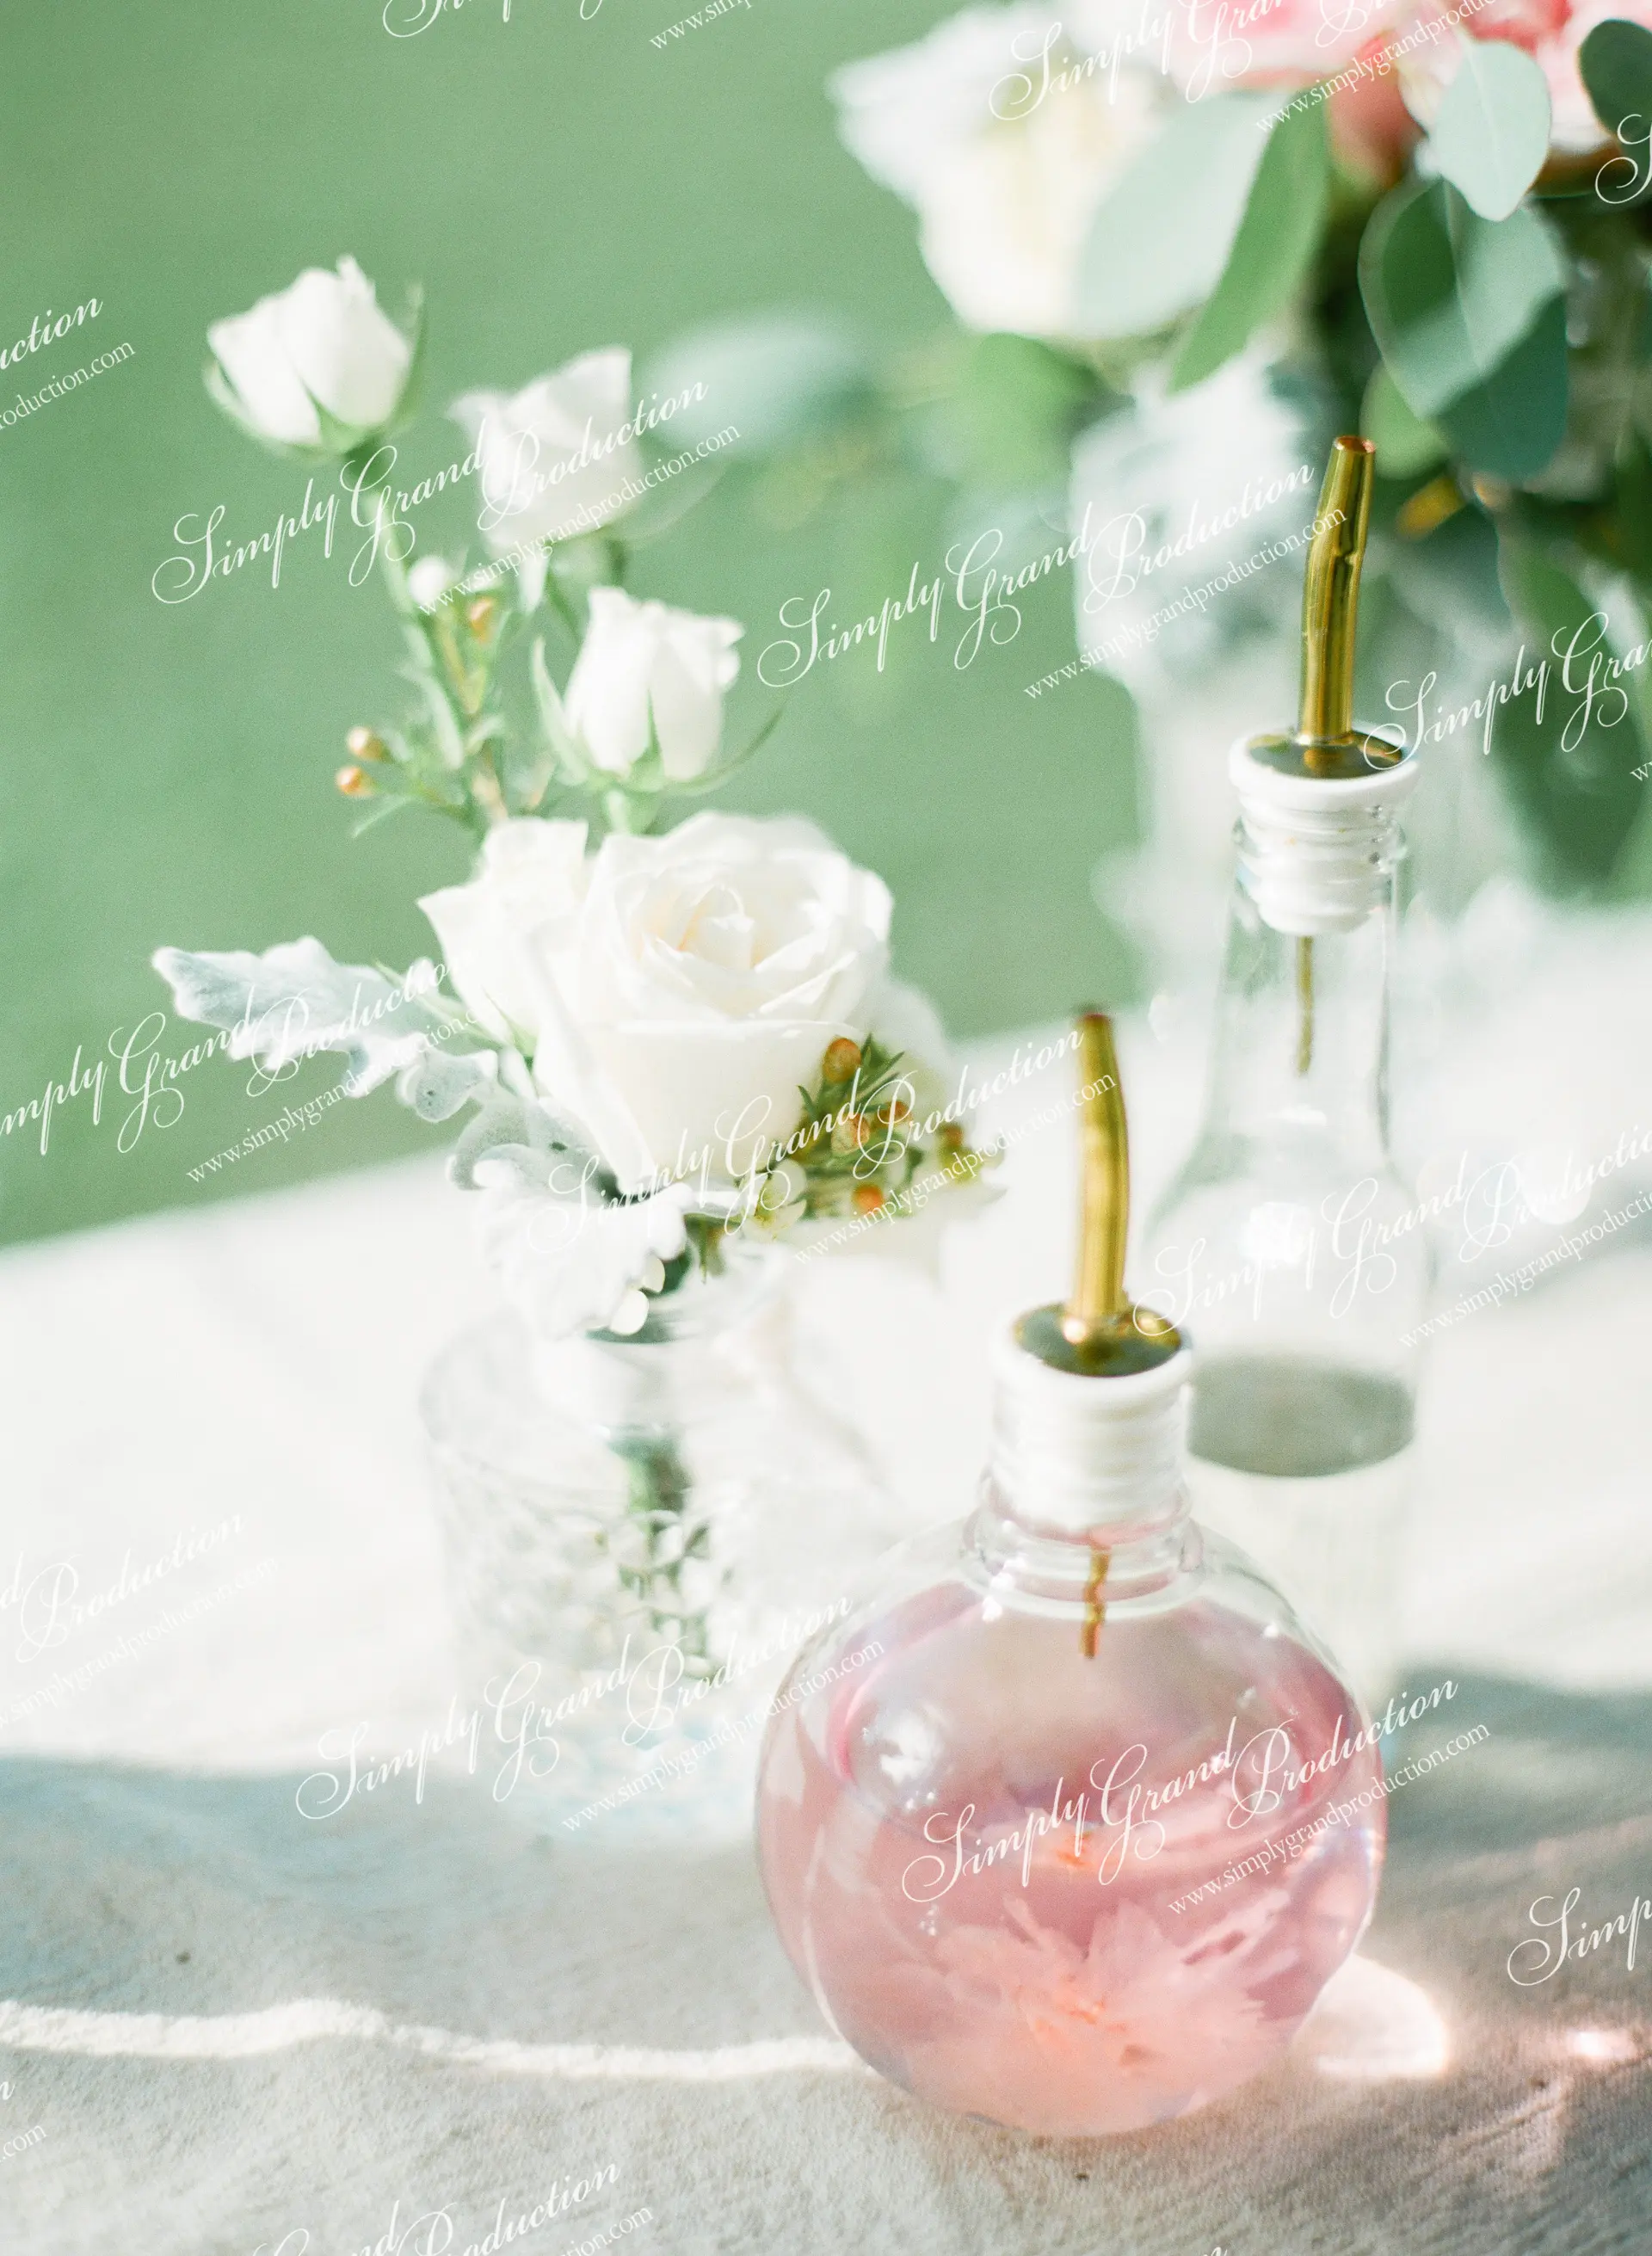 Simply_Grand_Production_Outdoor_wedding_decoration_photoshoot_Adventist_College_flower_vase_tiny_2_13.jpg